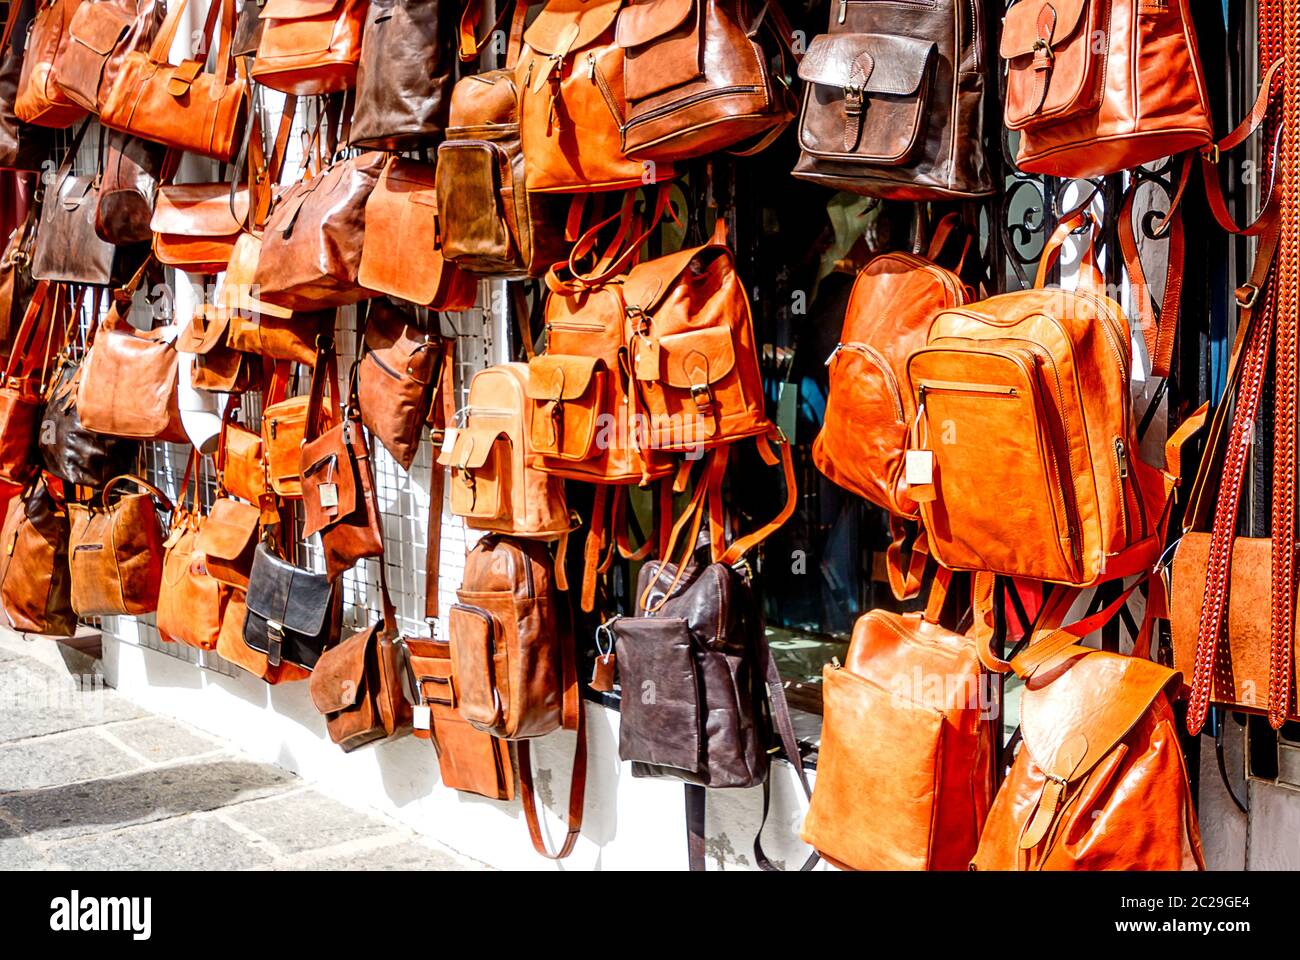 Shopping for handmade leather bags in Mijas, Andalusia, Costa del Sol, Spain Stock Photo